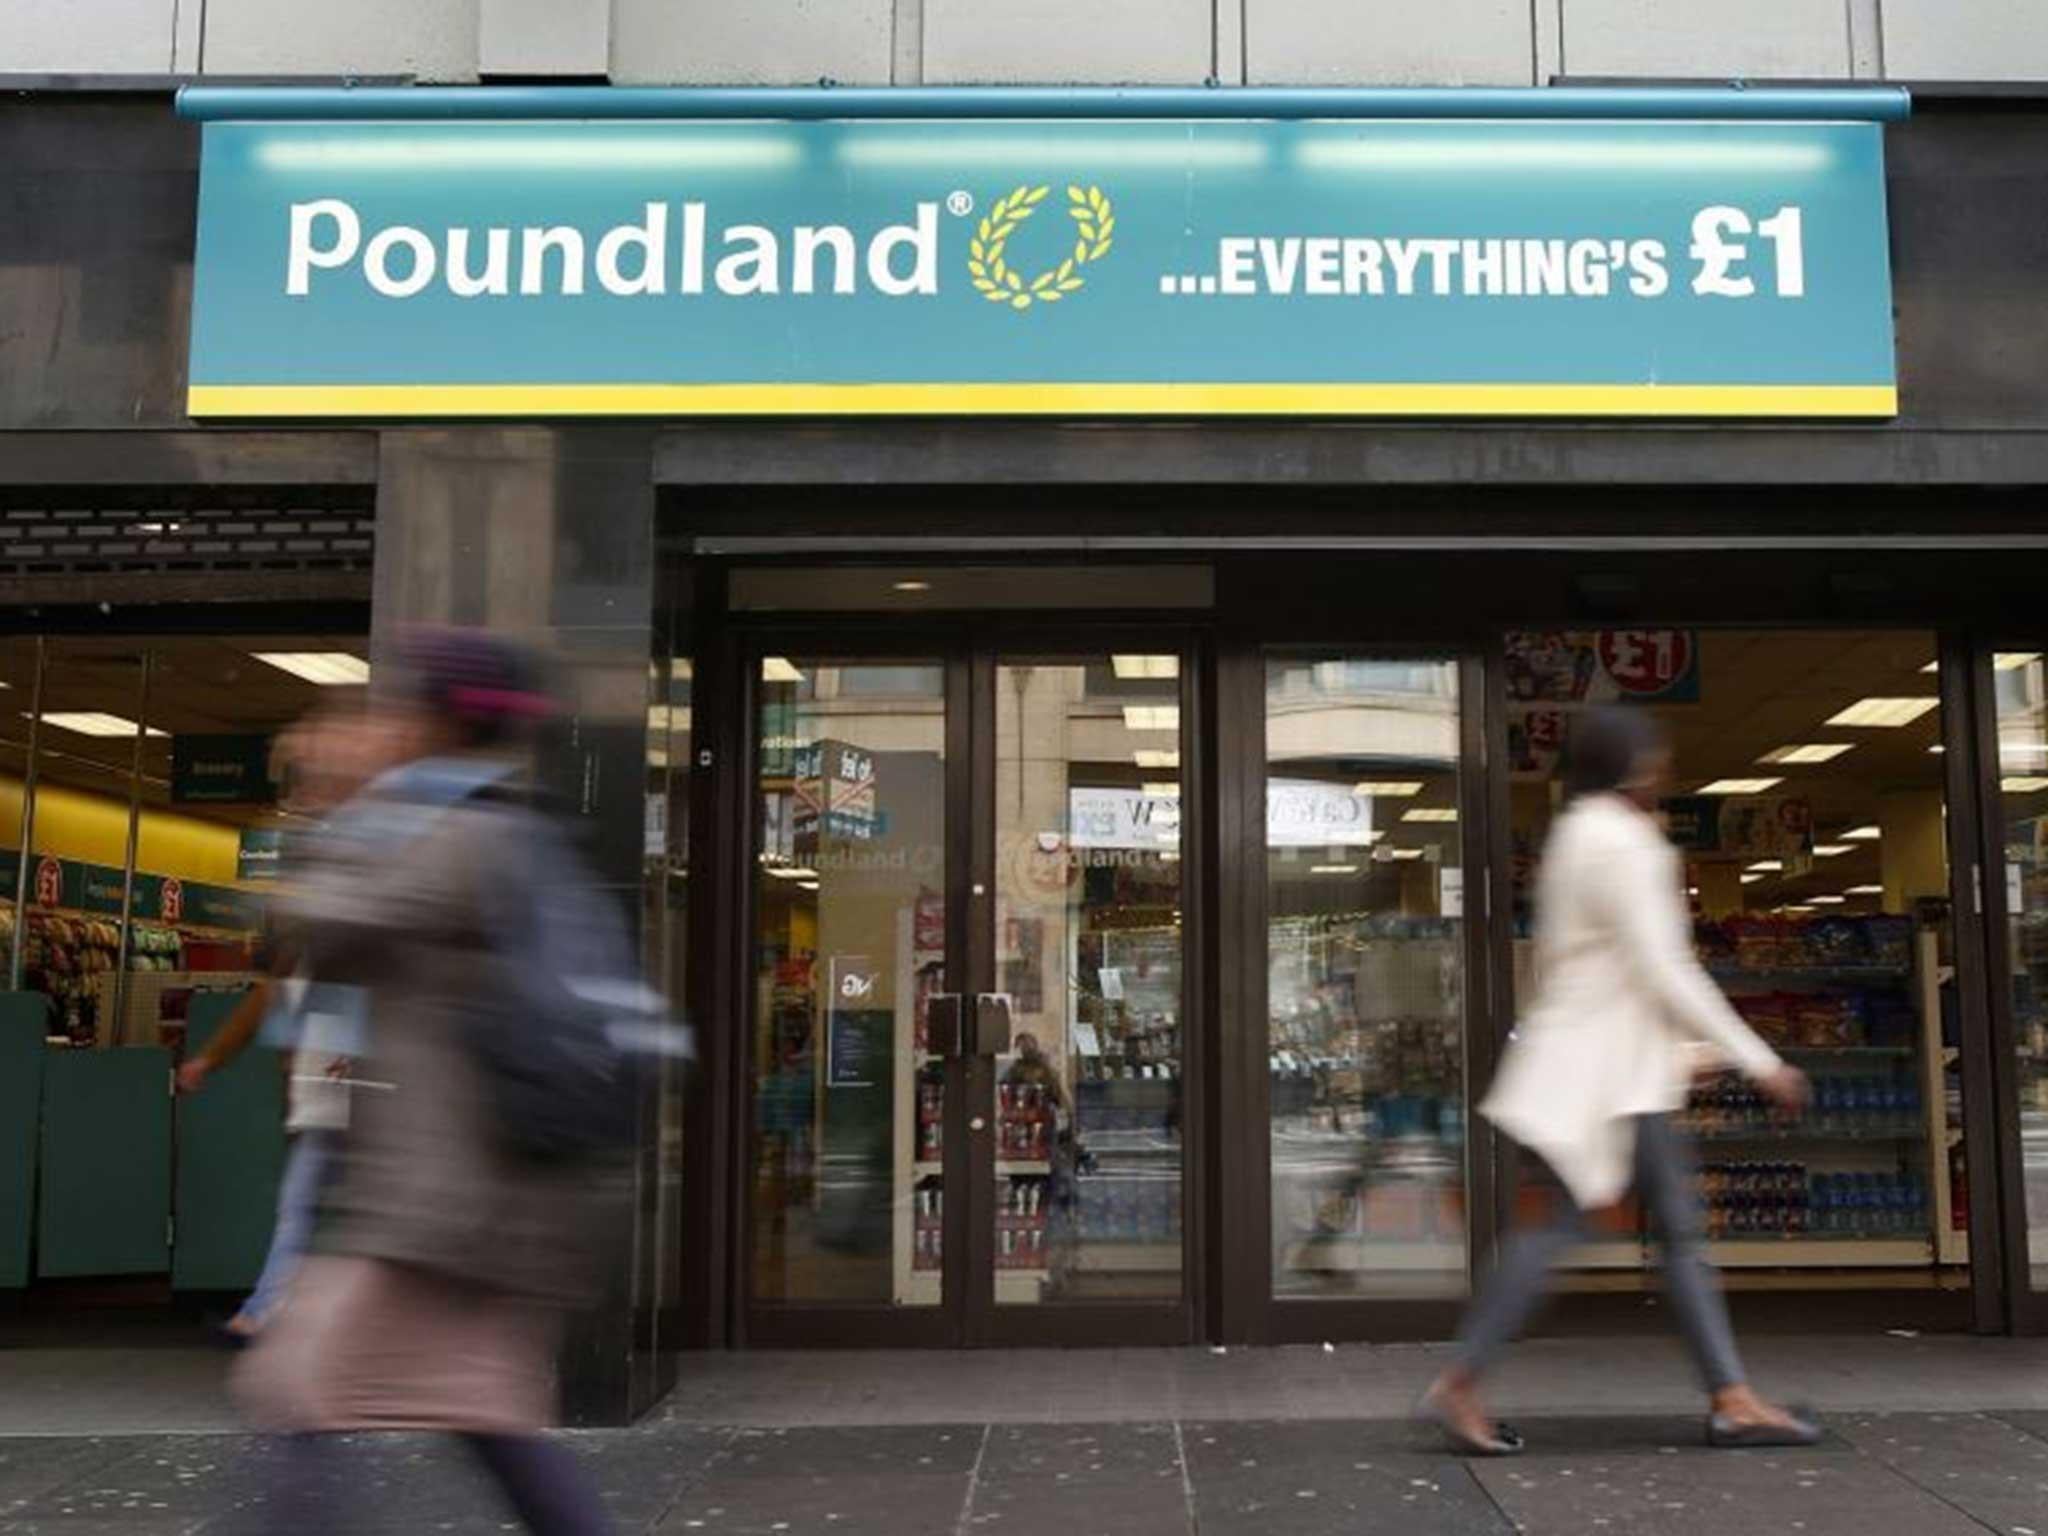 Shares in Poundland slipped more than 19 per cent to 225.9p